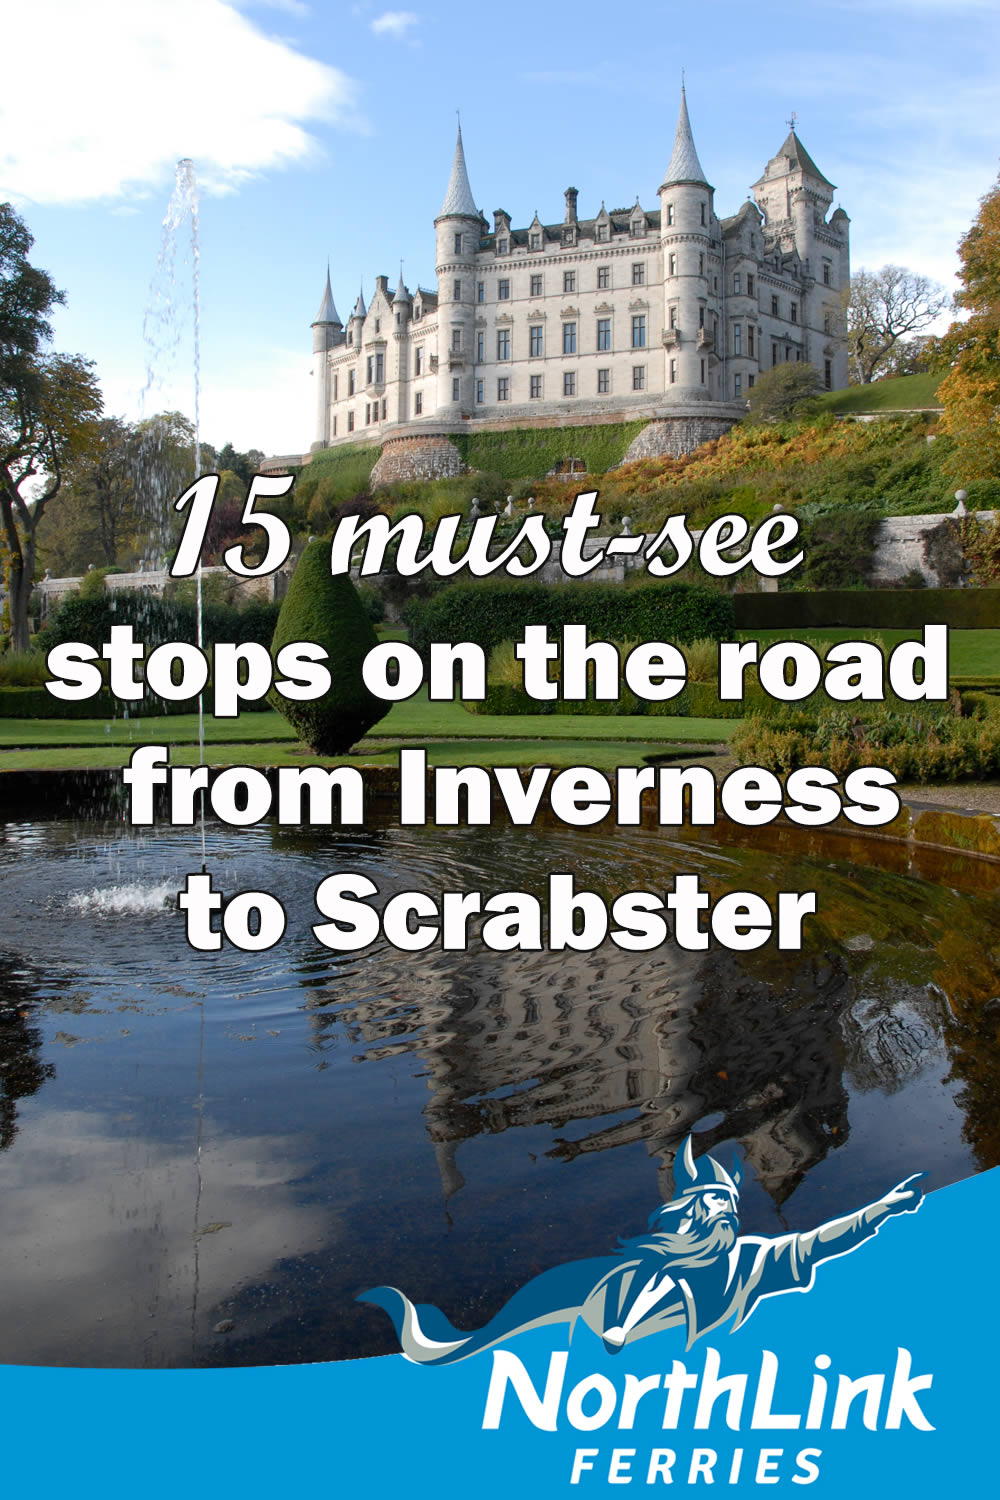 15 must-see stops on the road from Inverness to Scrabster